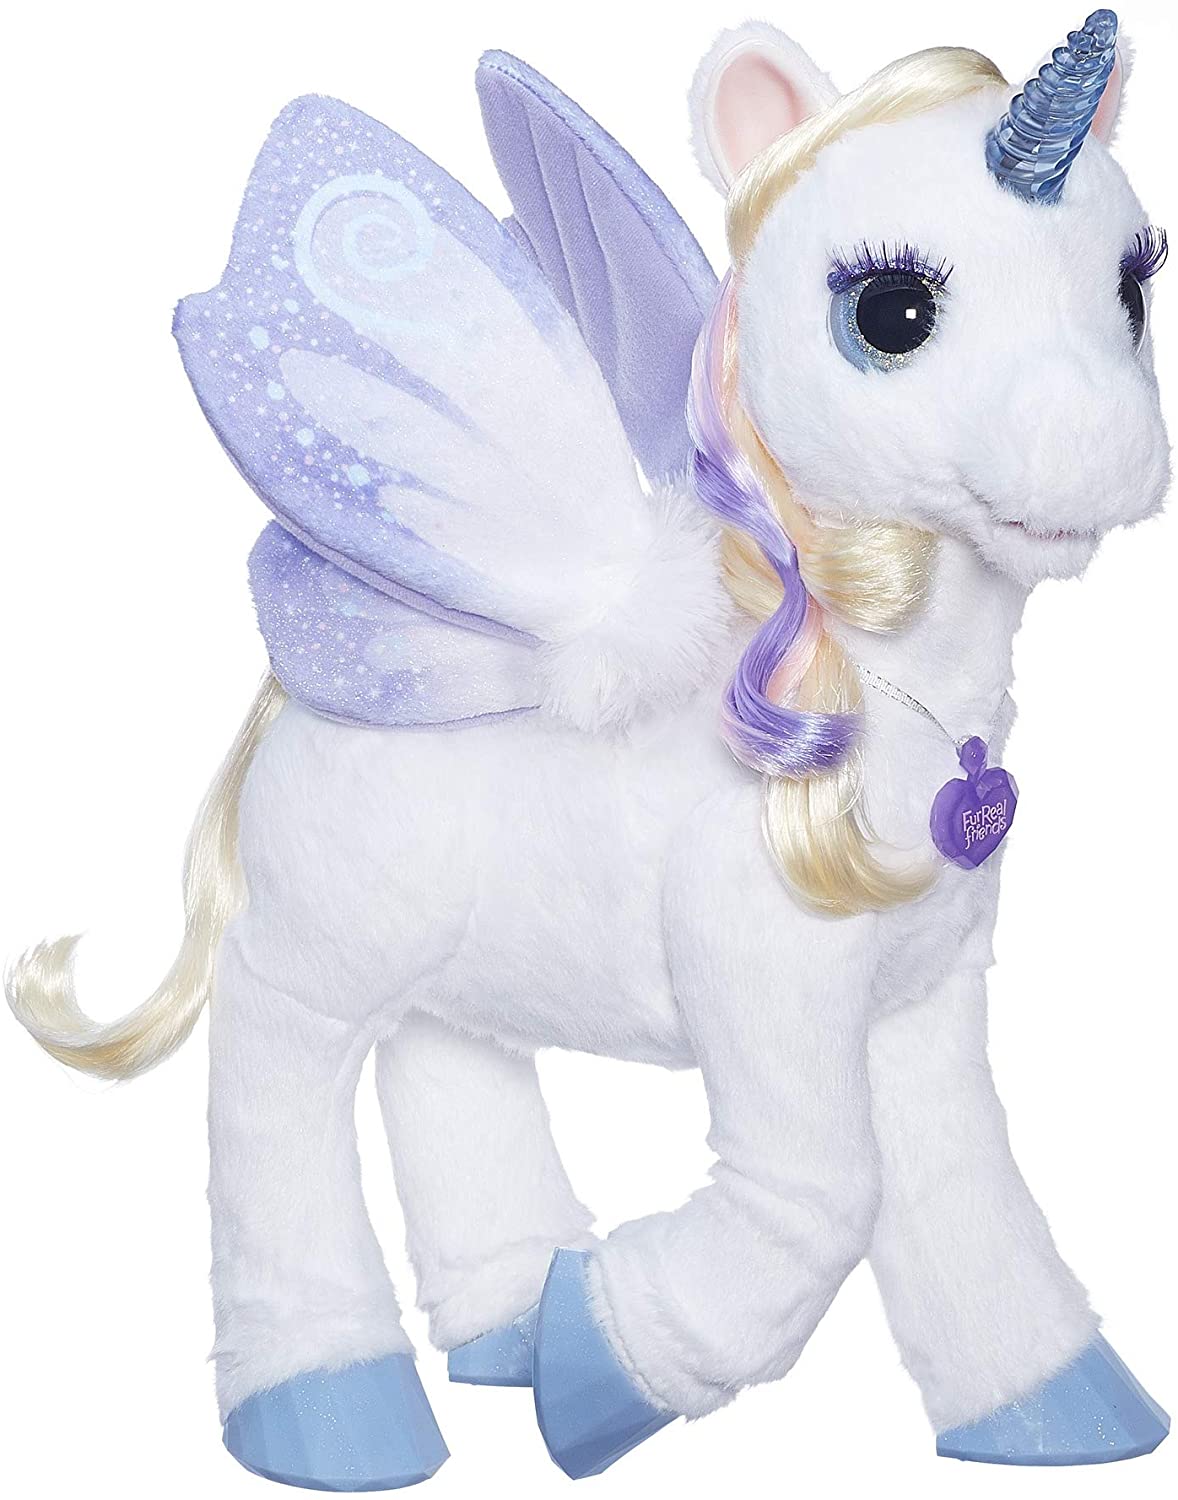 Review of furReal StarLily, My Magical Unicorn Interactive Plush Pet Toy